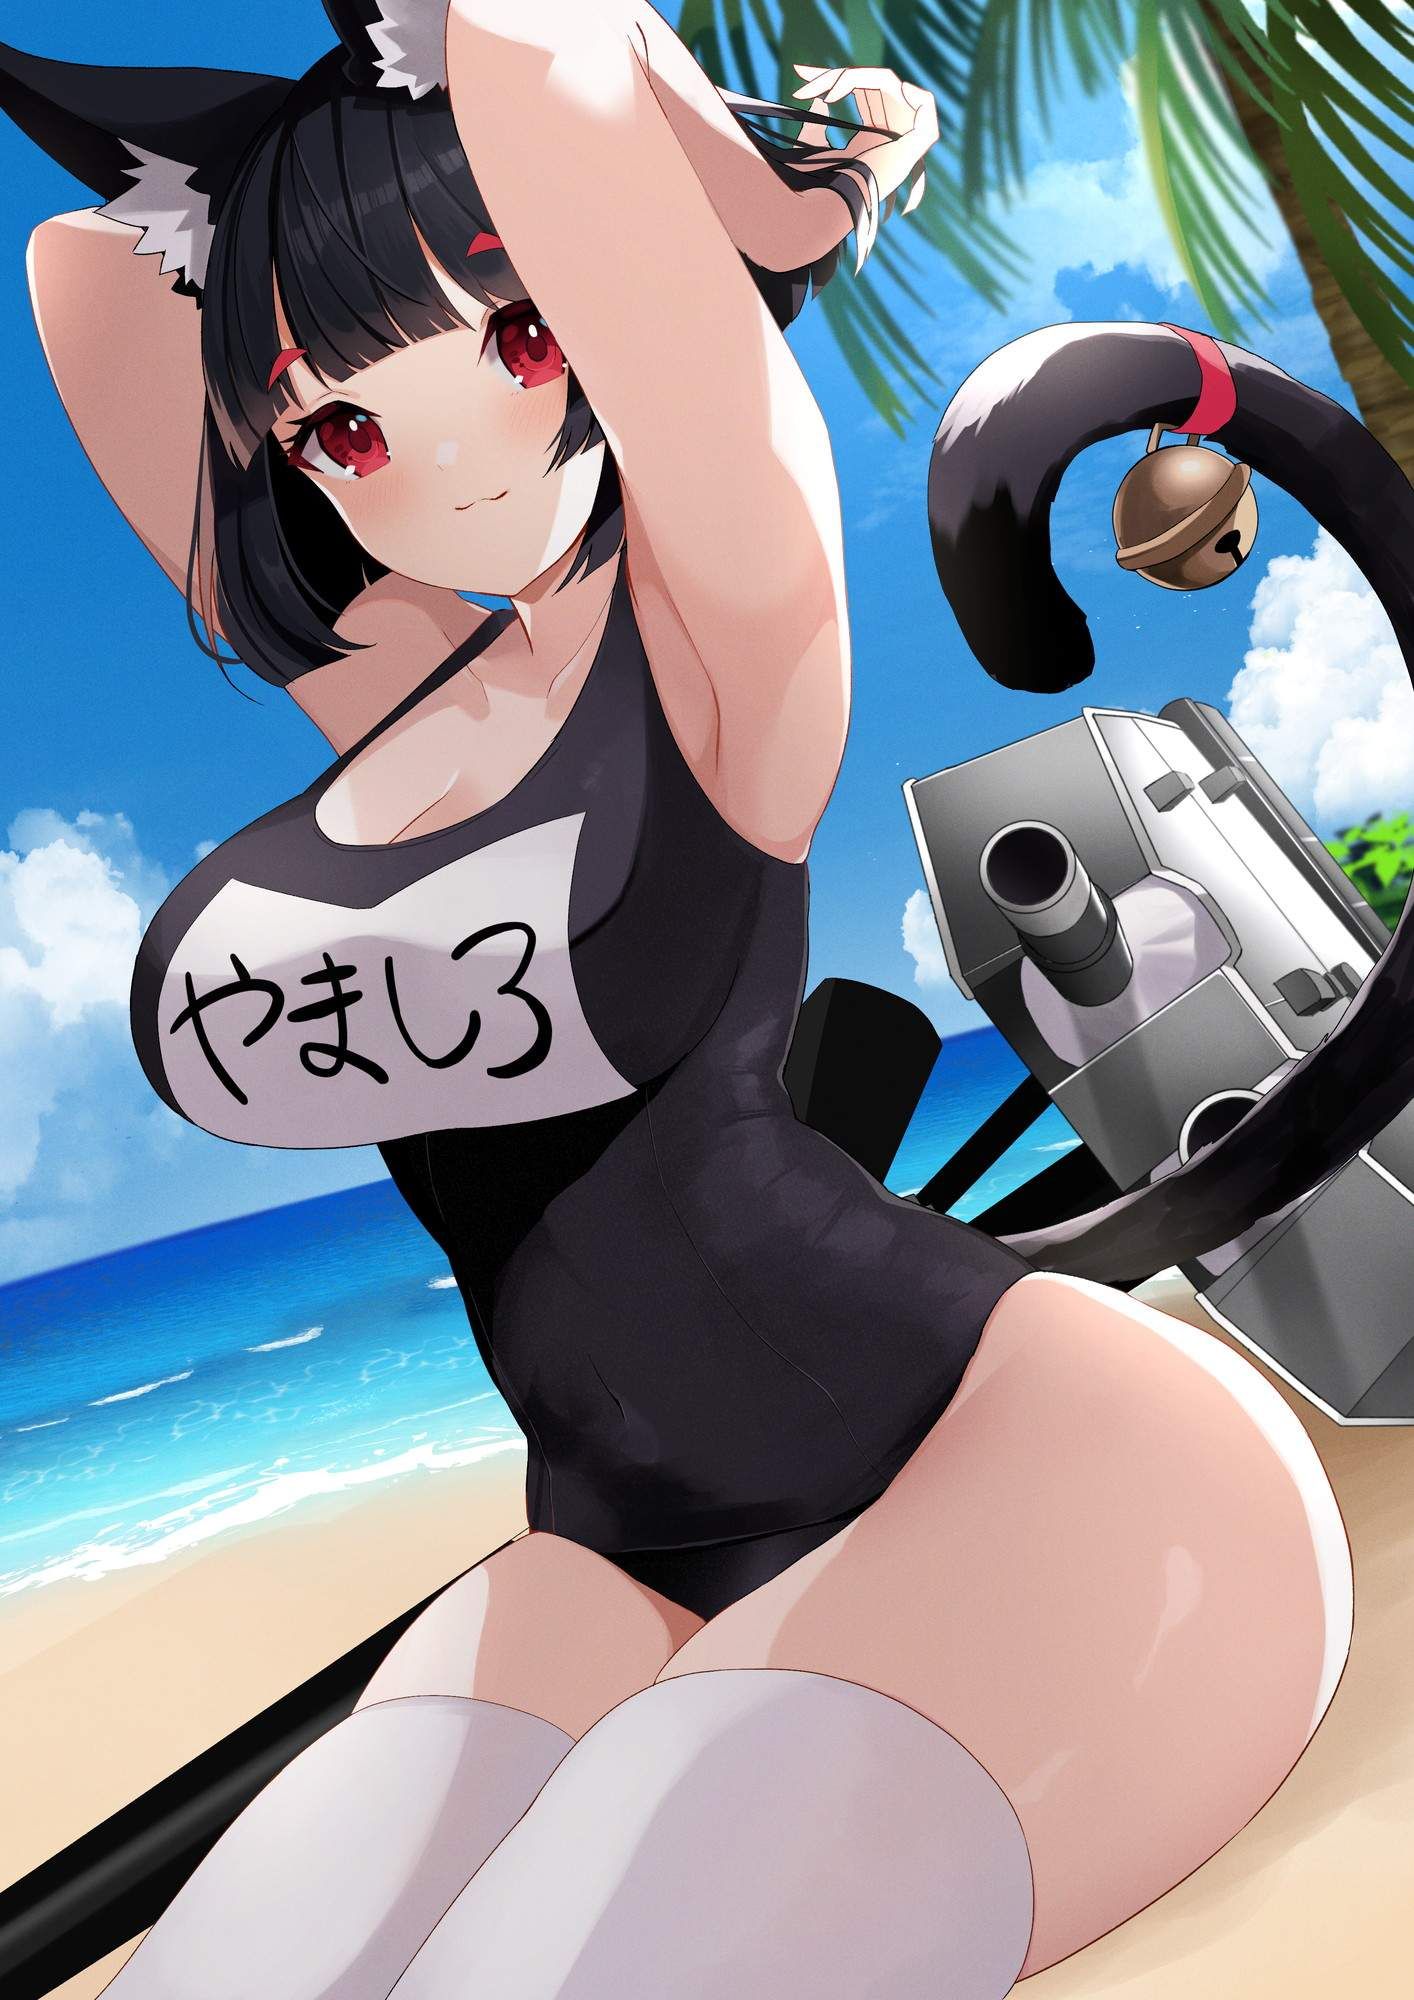 This is a two-dimensional erotic image of a girl wearing plump squirt water that says "This is no good..." 33